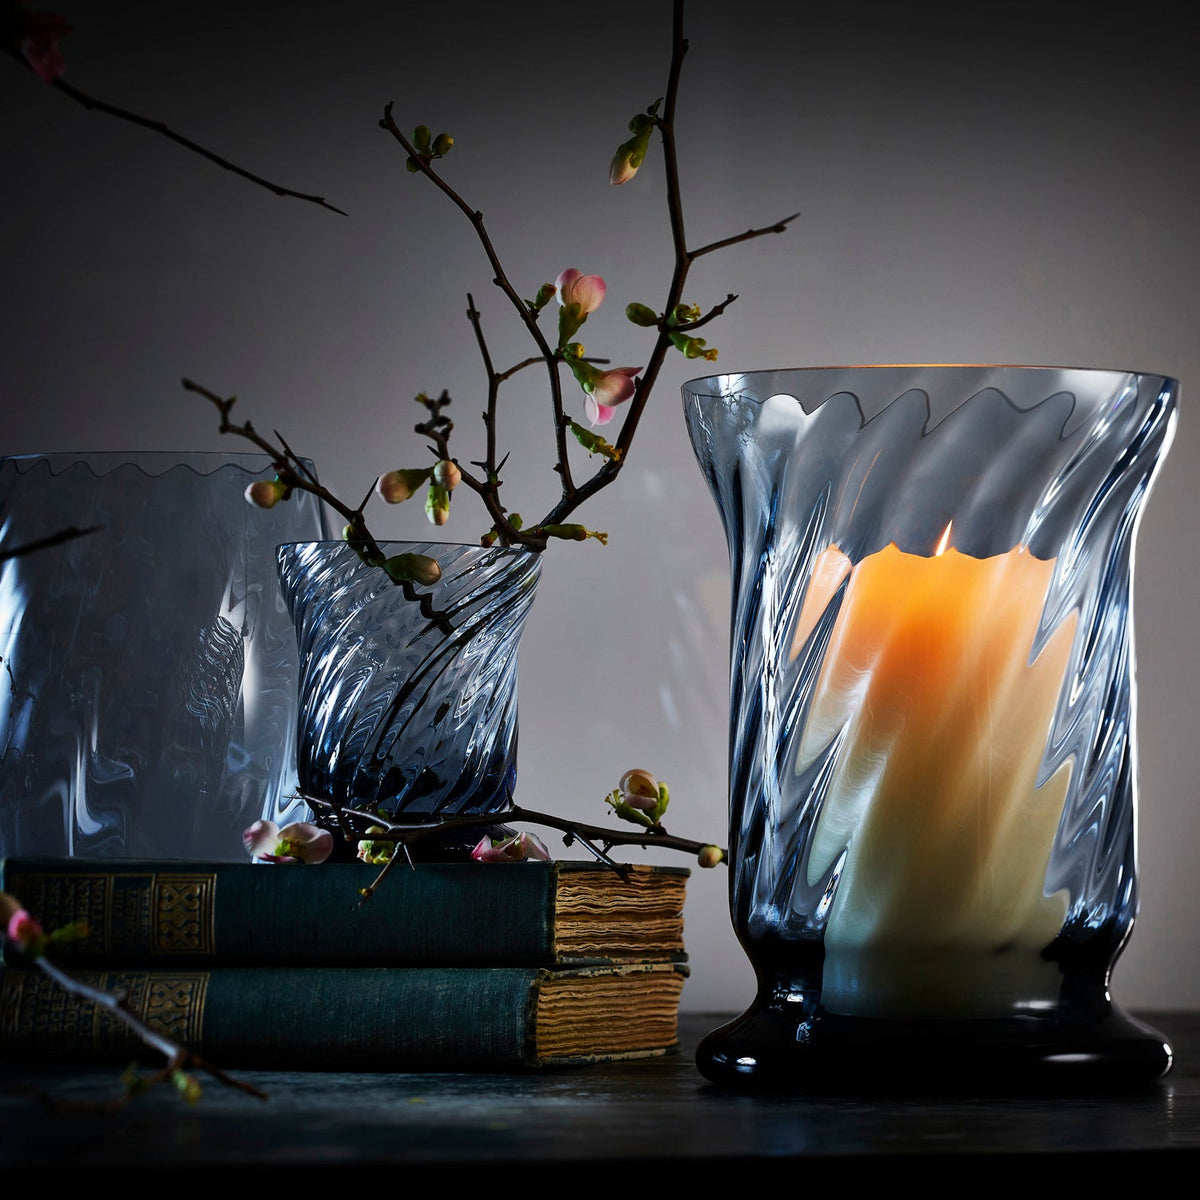 Caskata ocean blue candle holders in three different styles: Votive, Boothbay and Eliot Hurricanes. Photo features antique books and cherry blossoms.